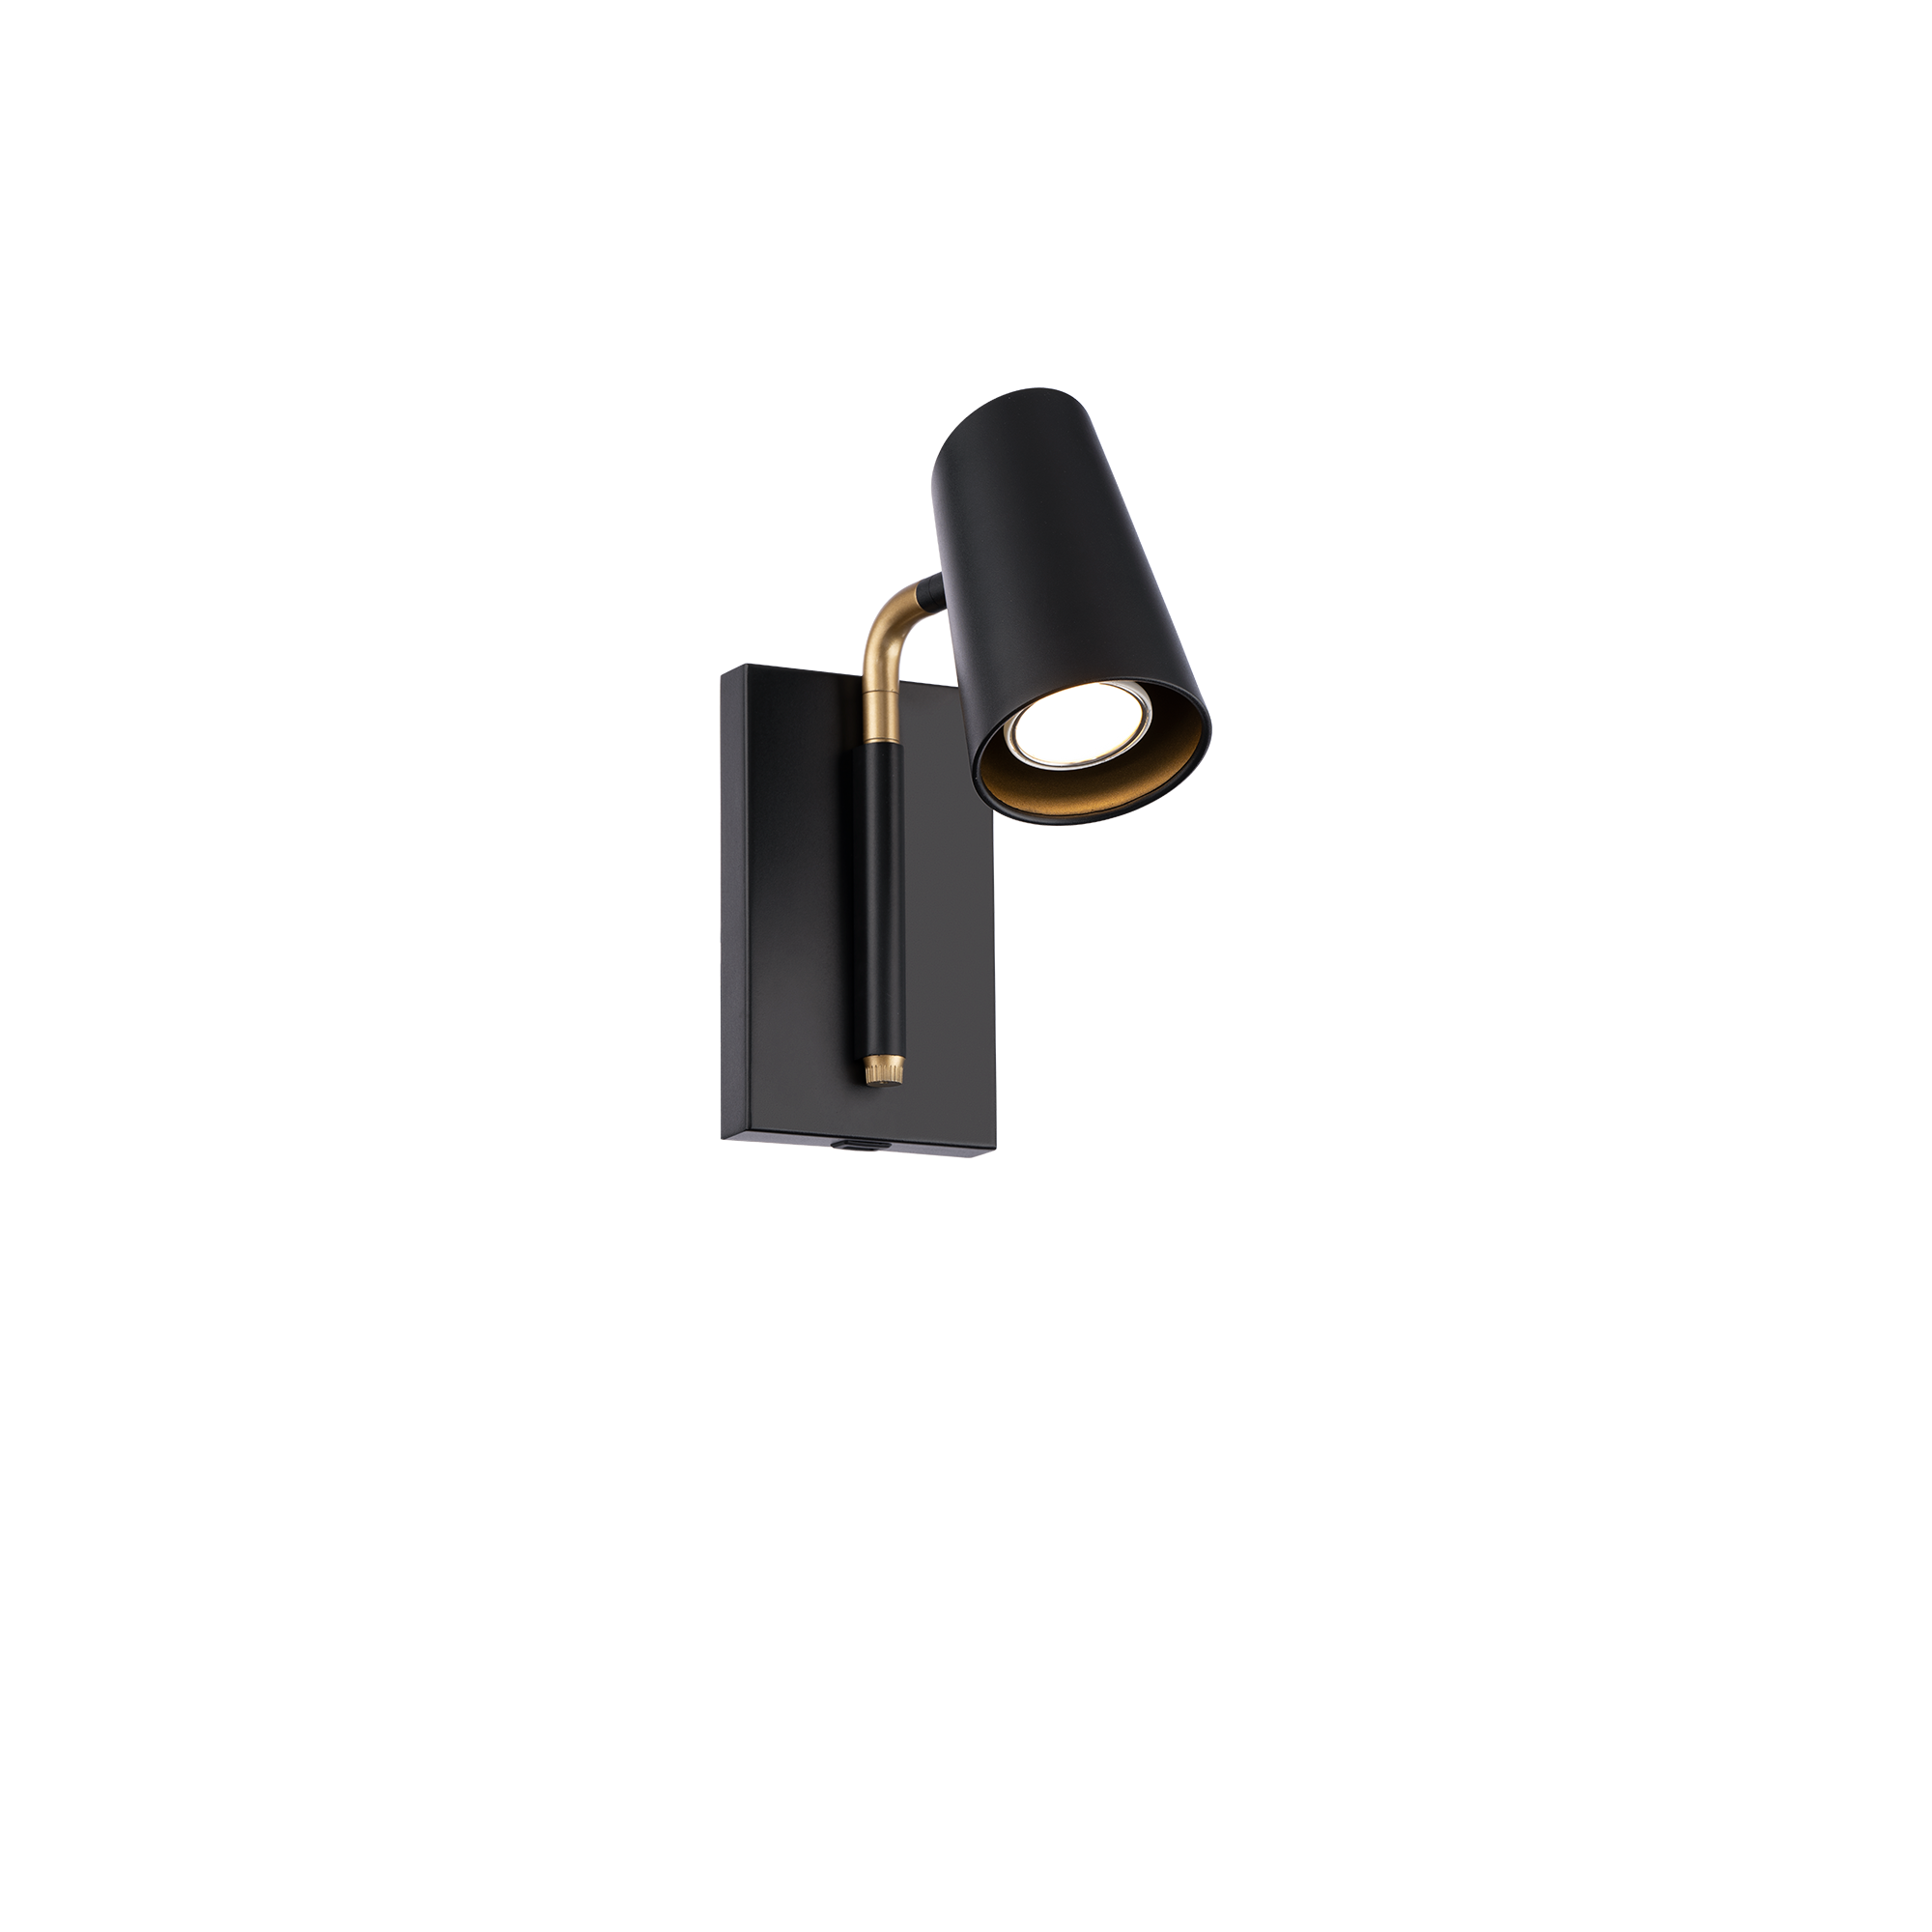 STYLUS Wall sconce Black, Gold INTEGRATED LED - BL-24908-BK/GO | MODERN FORMS